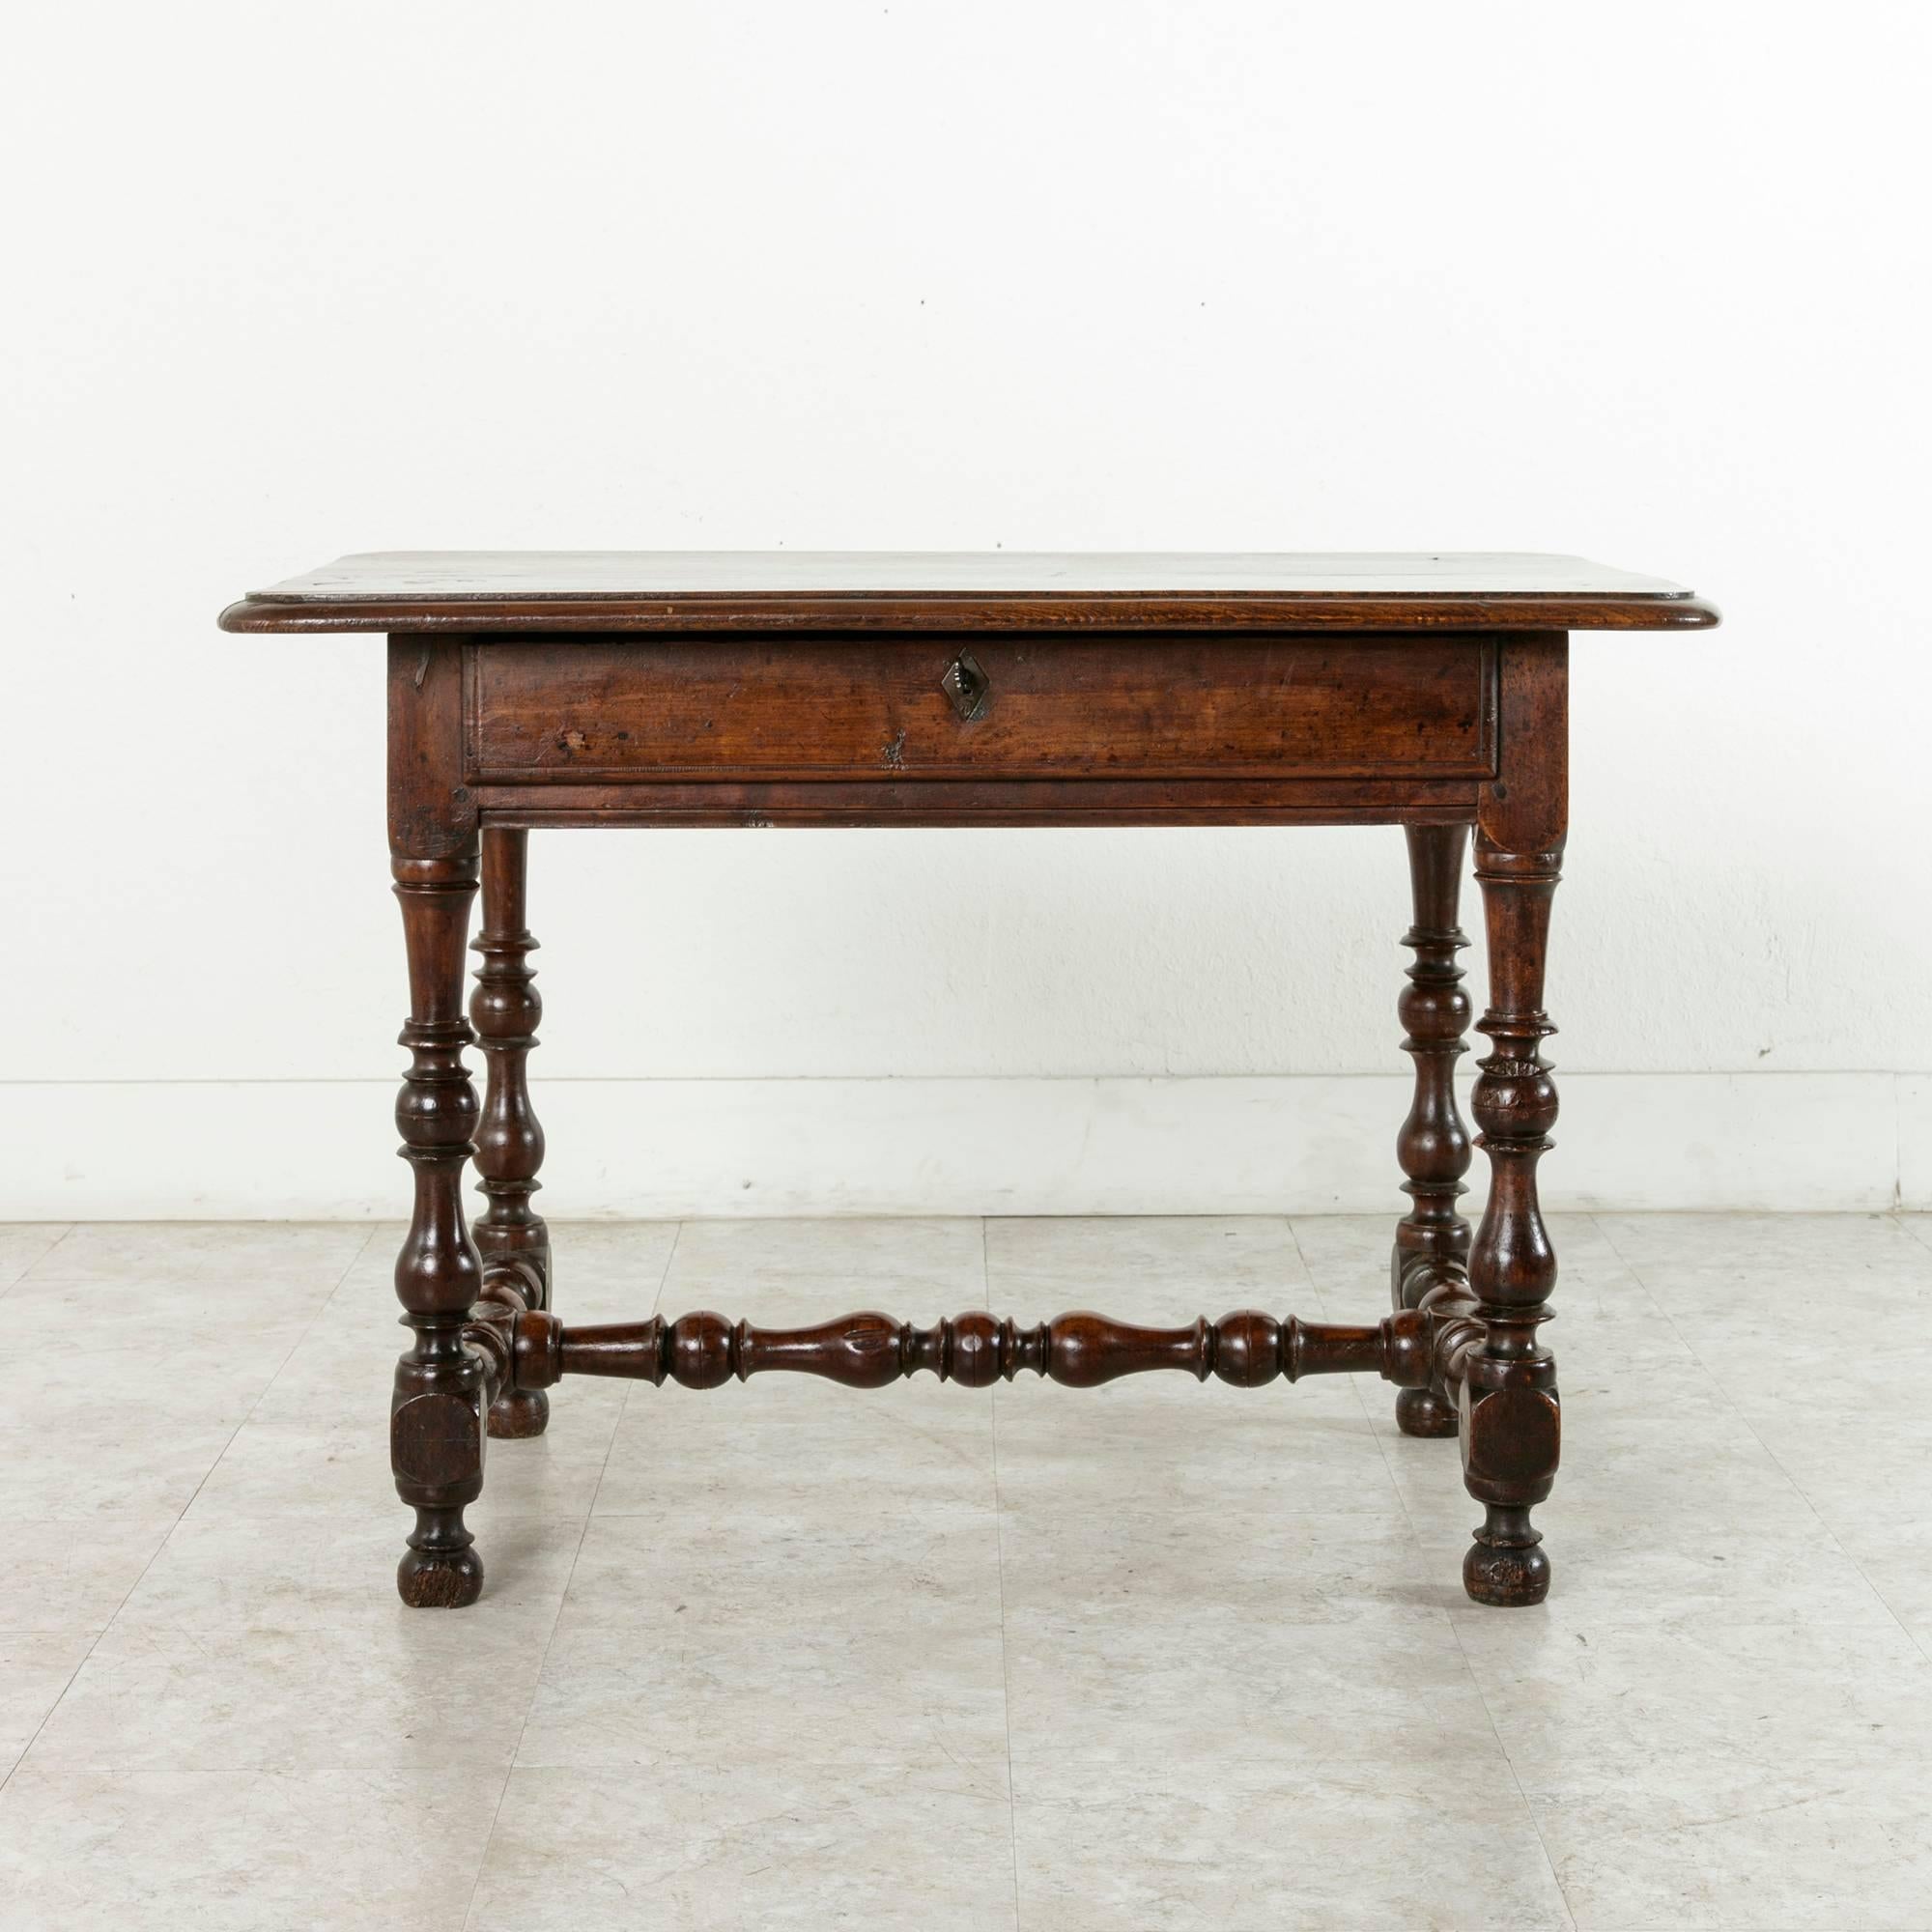 French 18th Century Louis XIII Style Oak Table with Turned Legs and Single Drawer